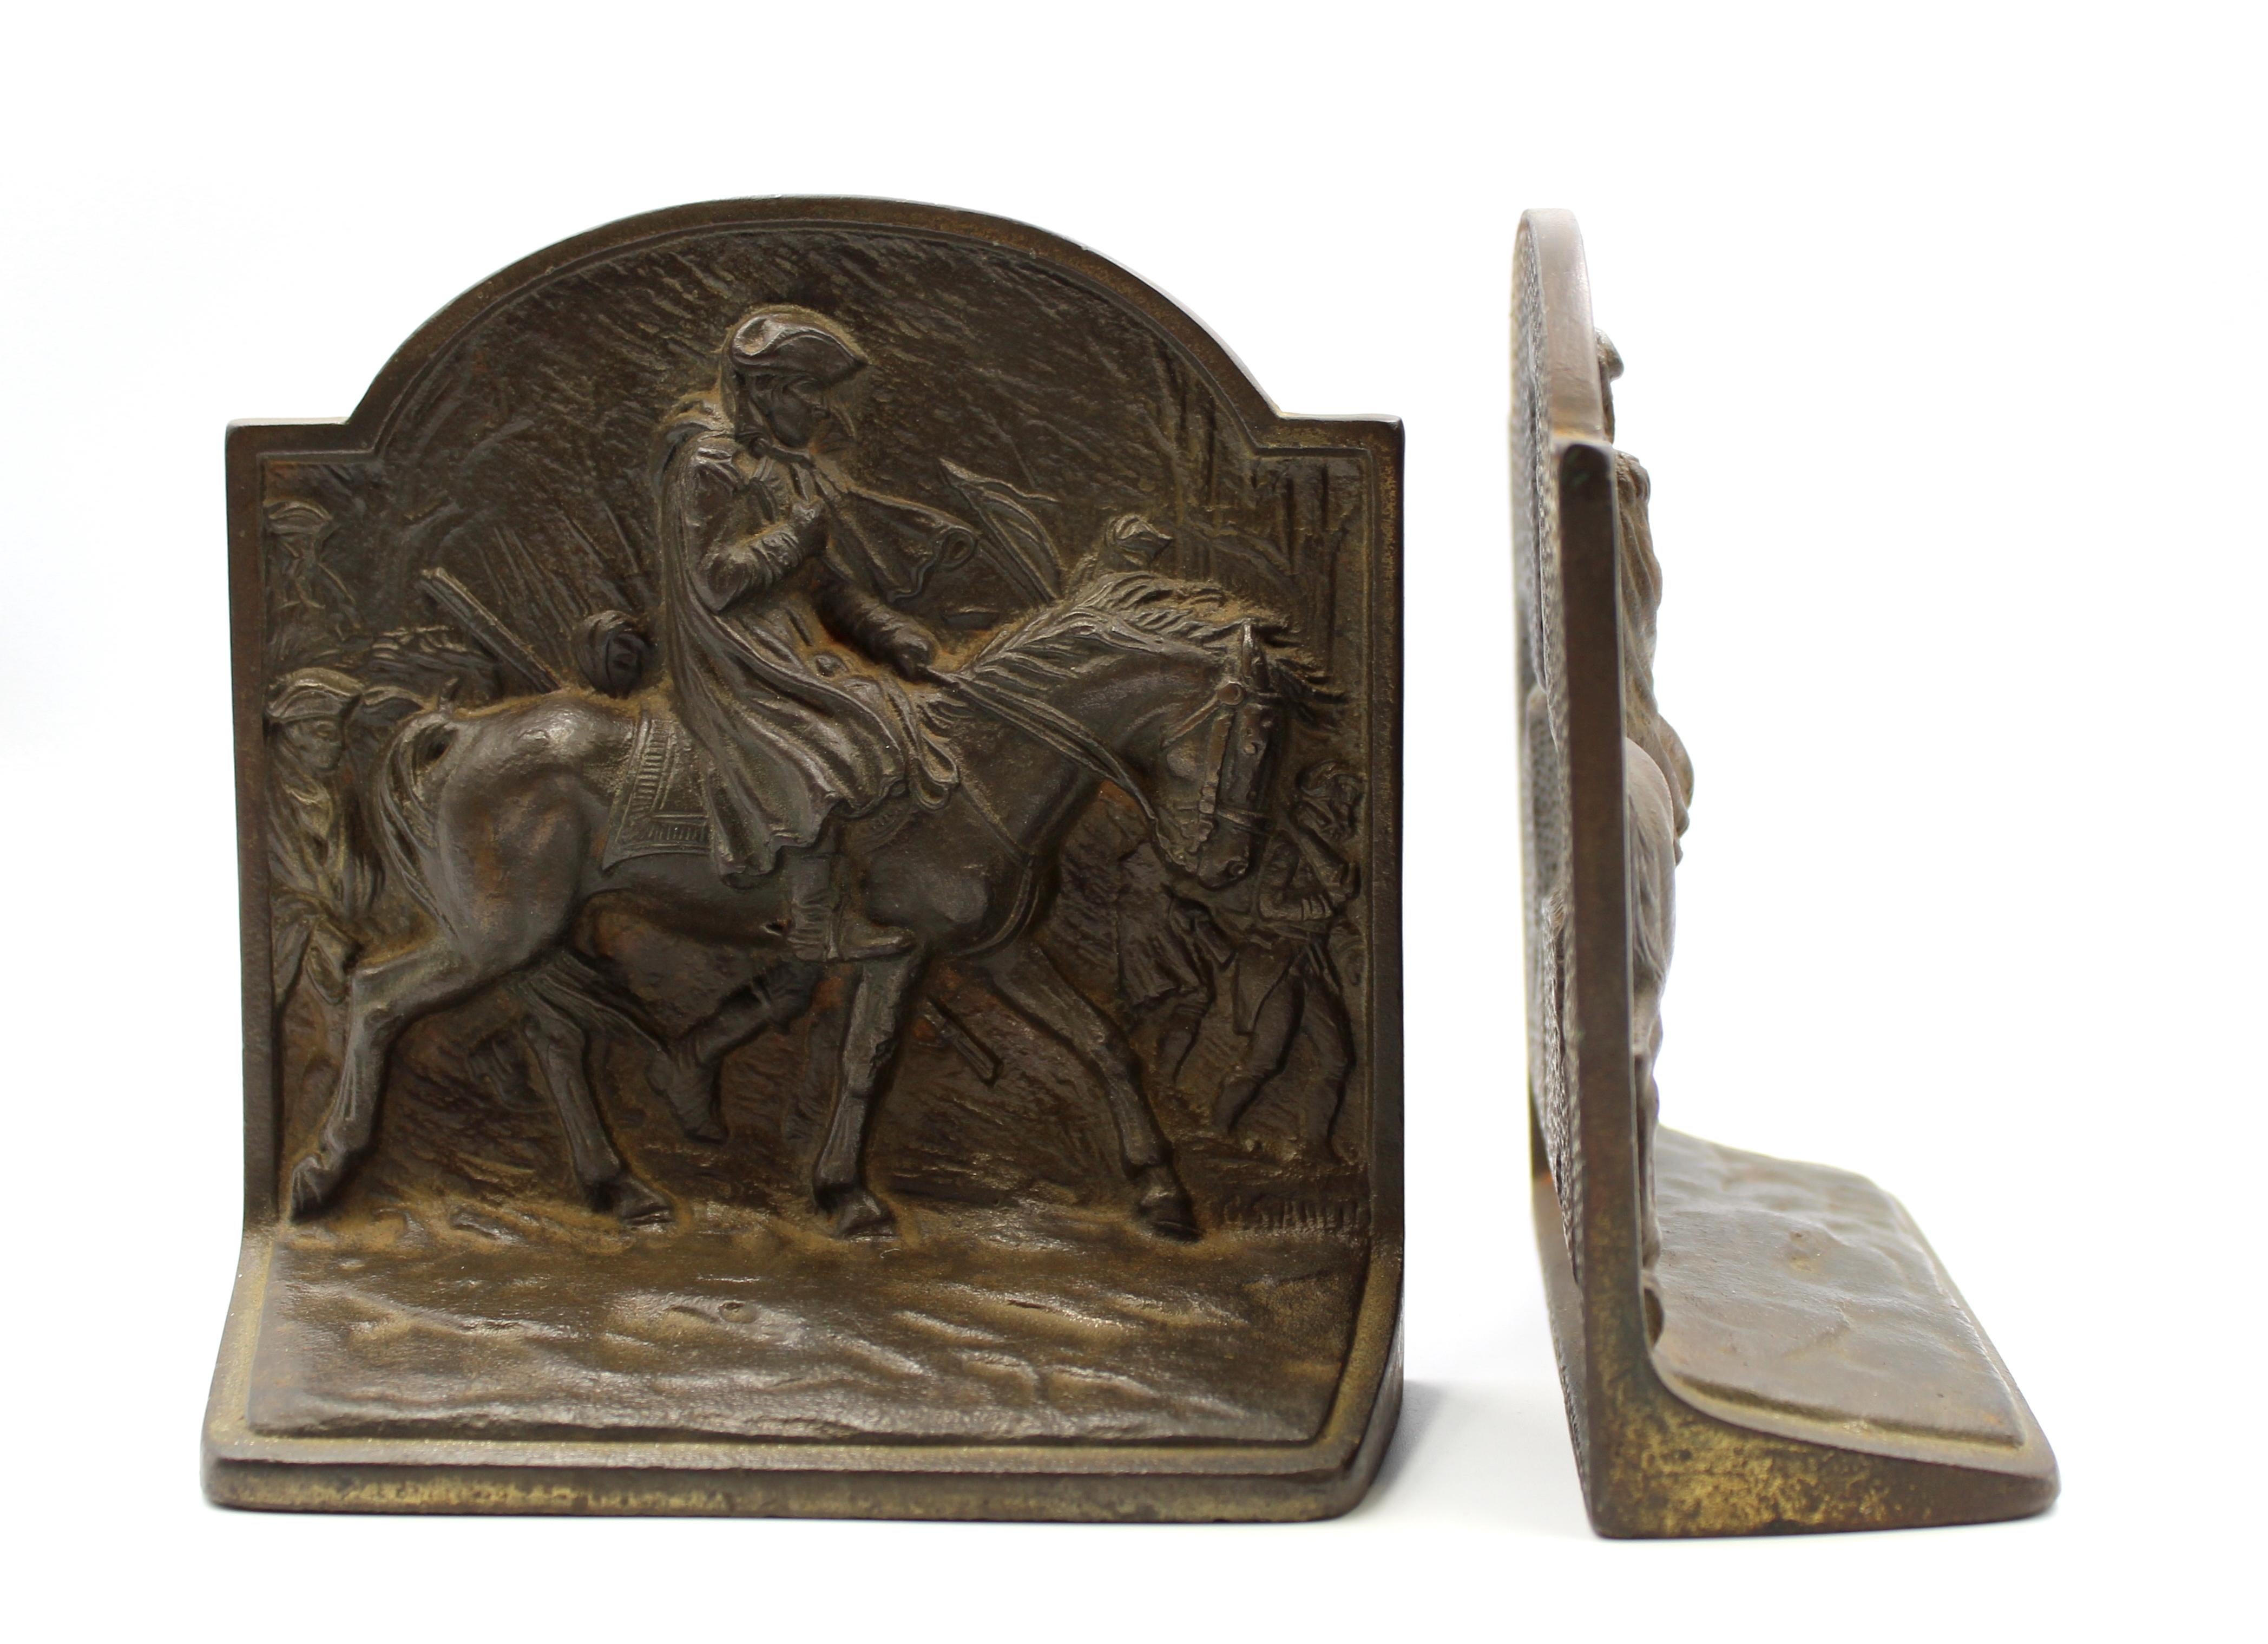 Federal Vintage Washington at Valley Forge Bookends by Hubley, Circa 1925